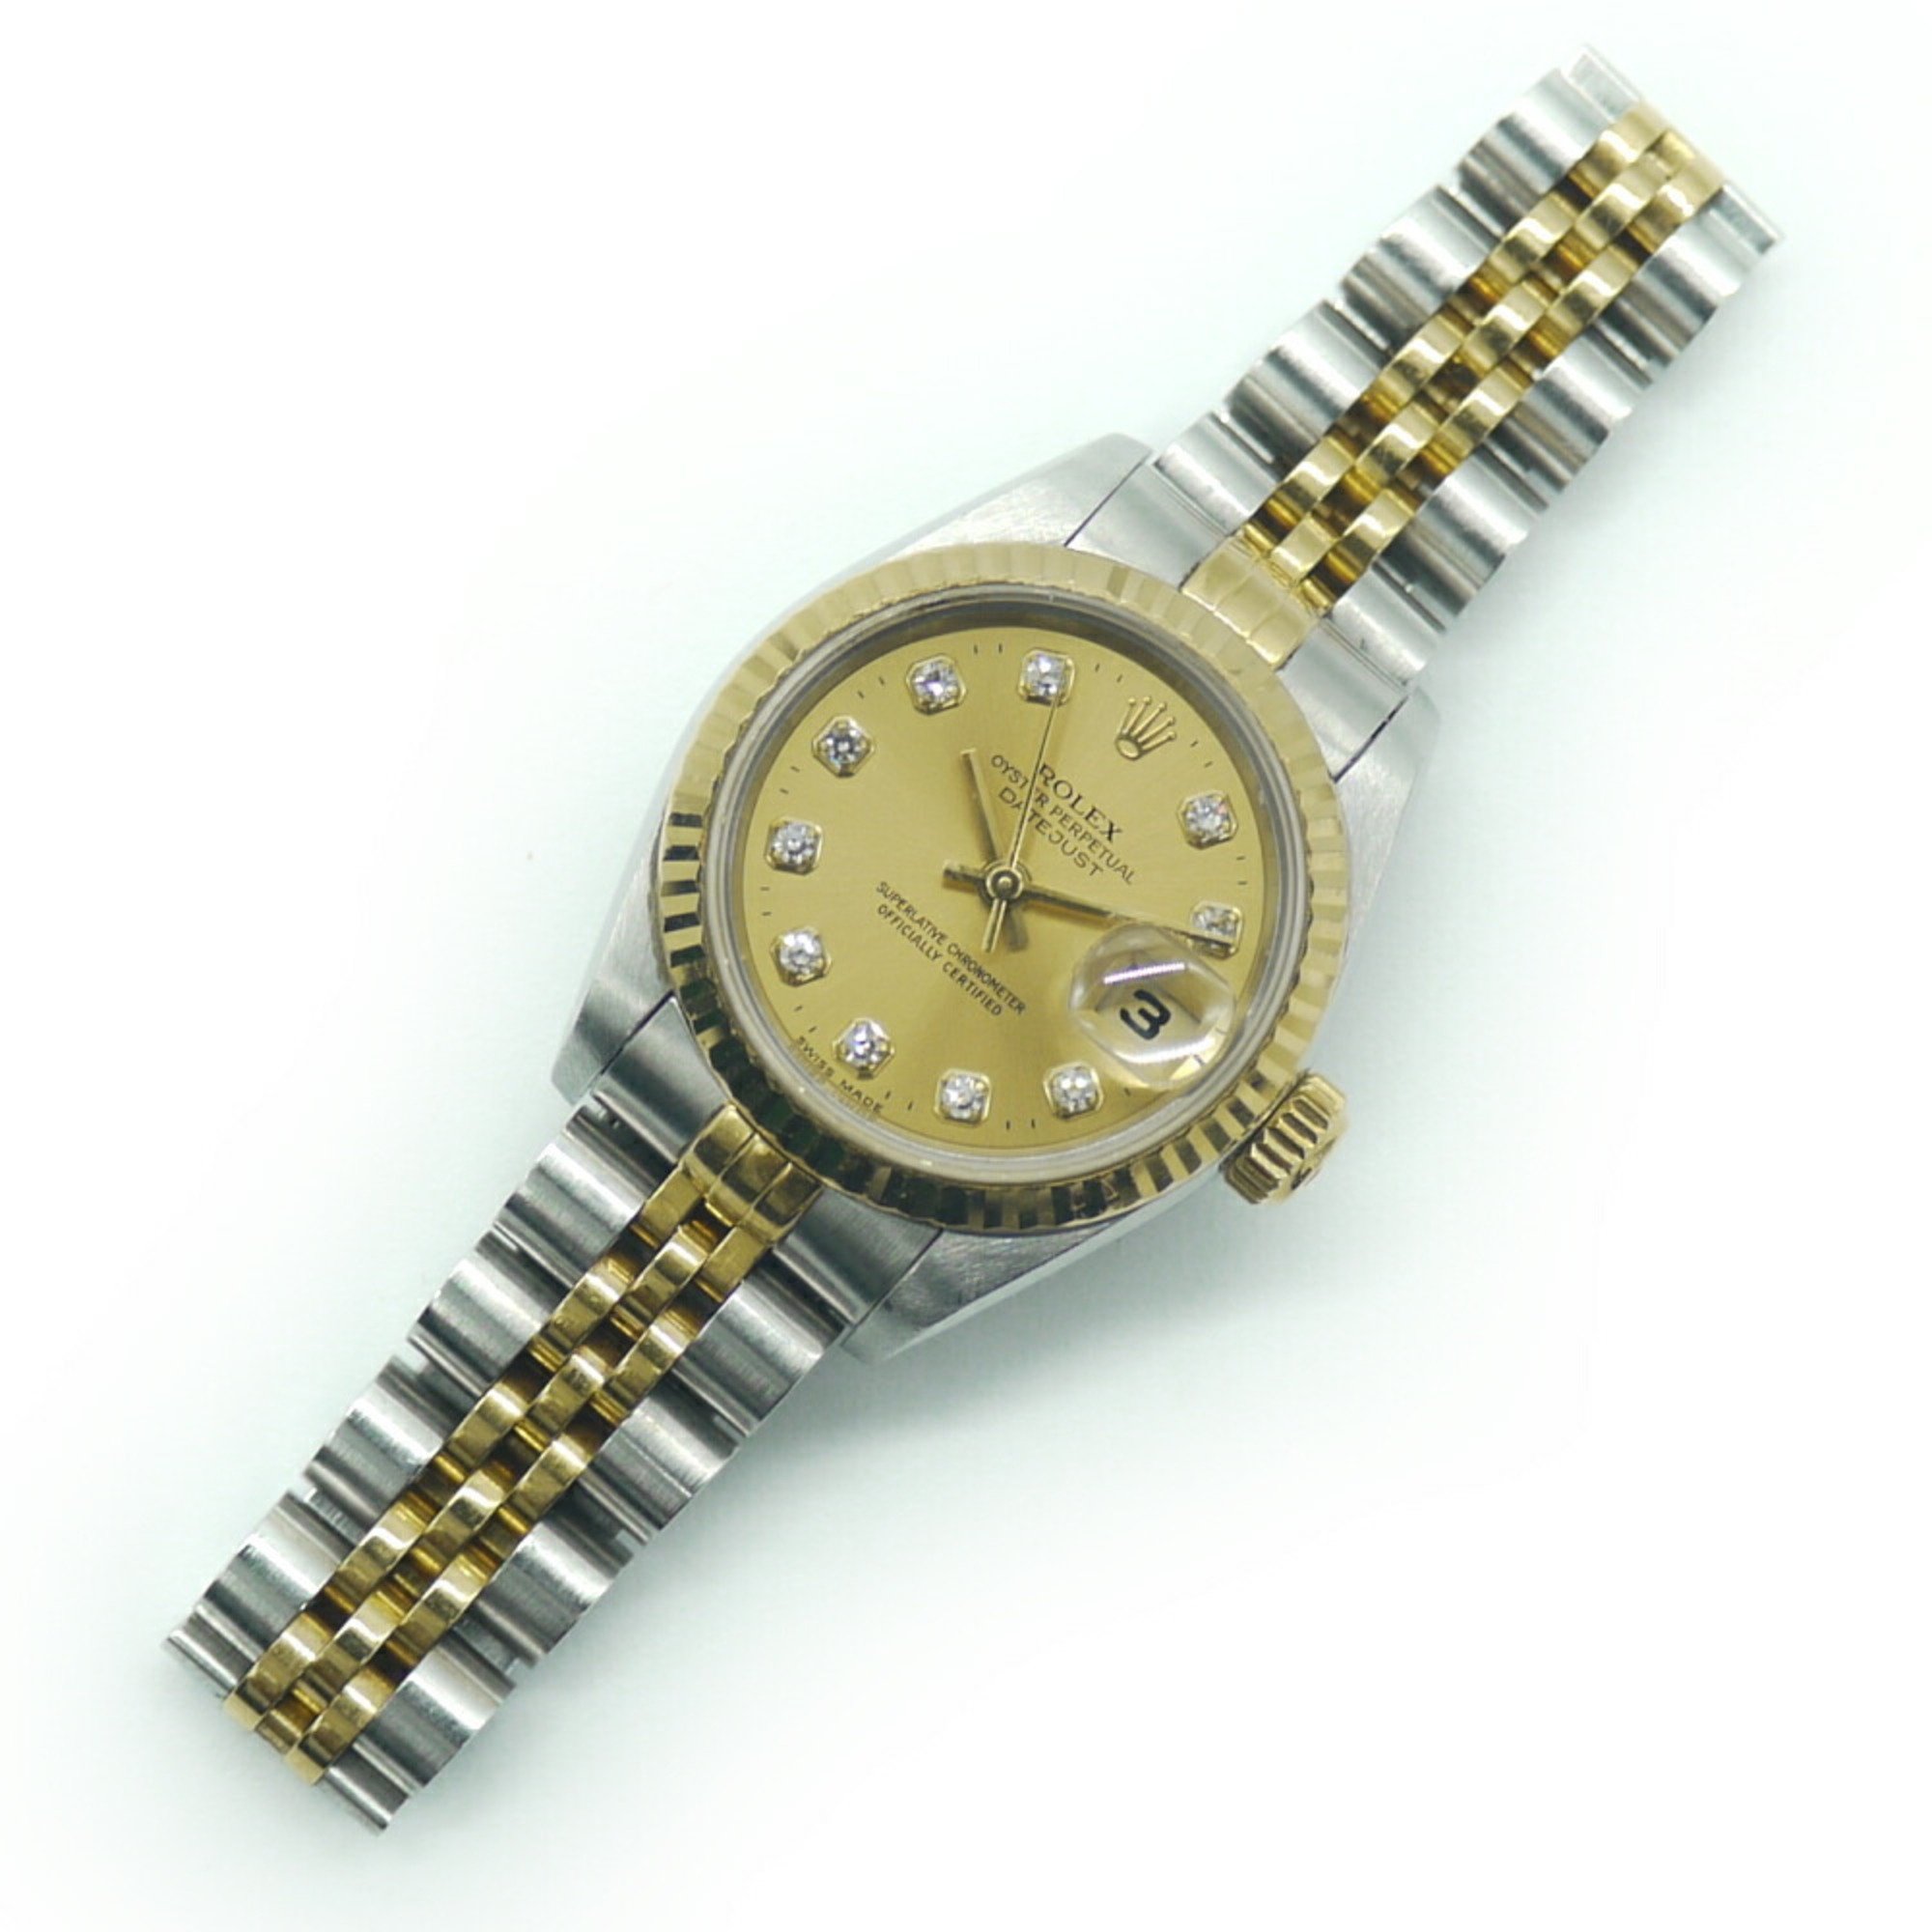 ROLEX Datejust 69173G S serial automatic watch 10P diamond gold dial ladies